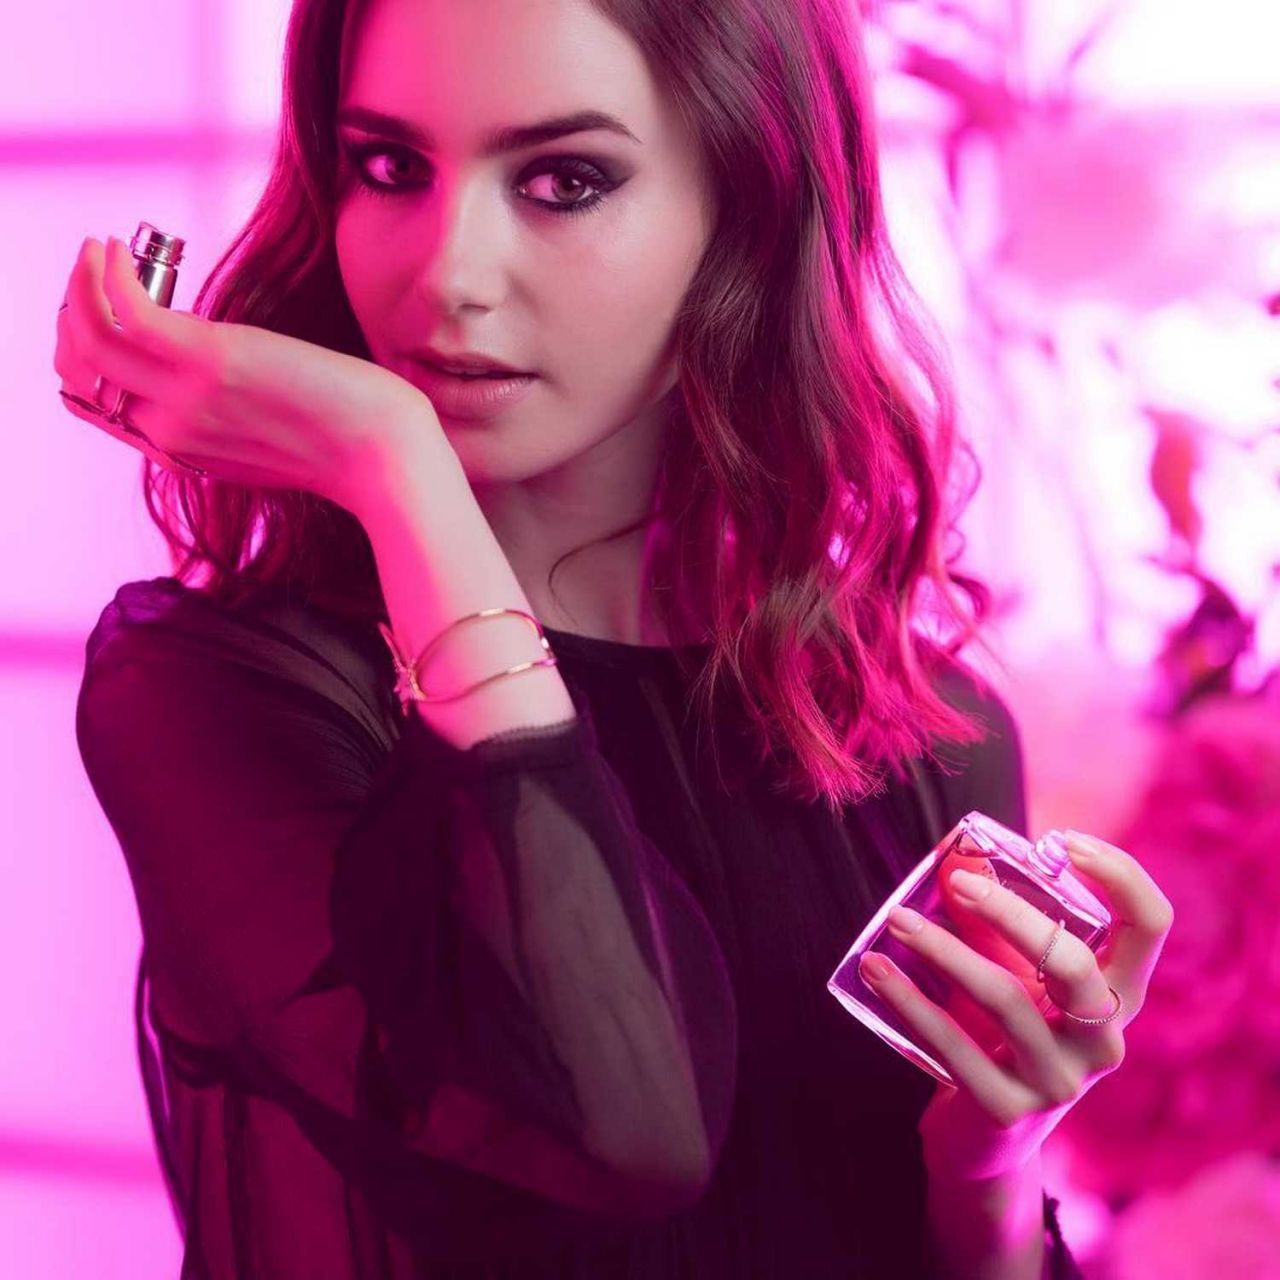 https://celebmafia.com/wp-content/uploads/2017/11/lily-collins-photoshoot-for-lancome-s-miracle-secret-fragrance-campaign-2017-1.jpg